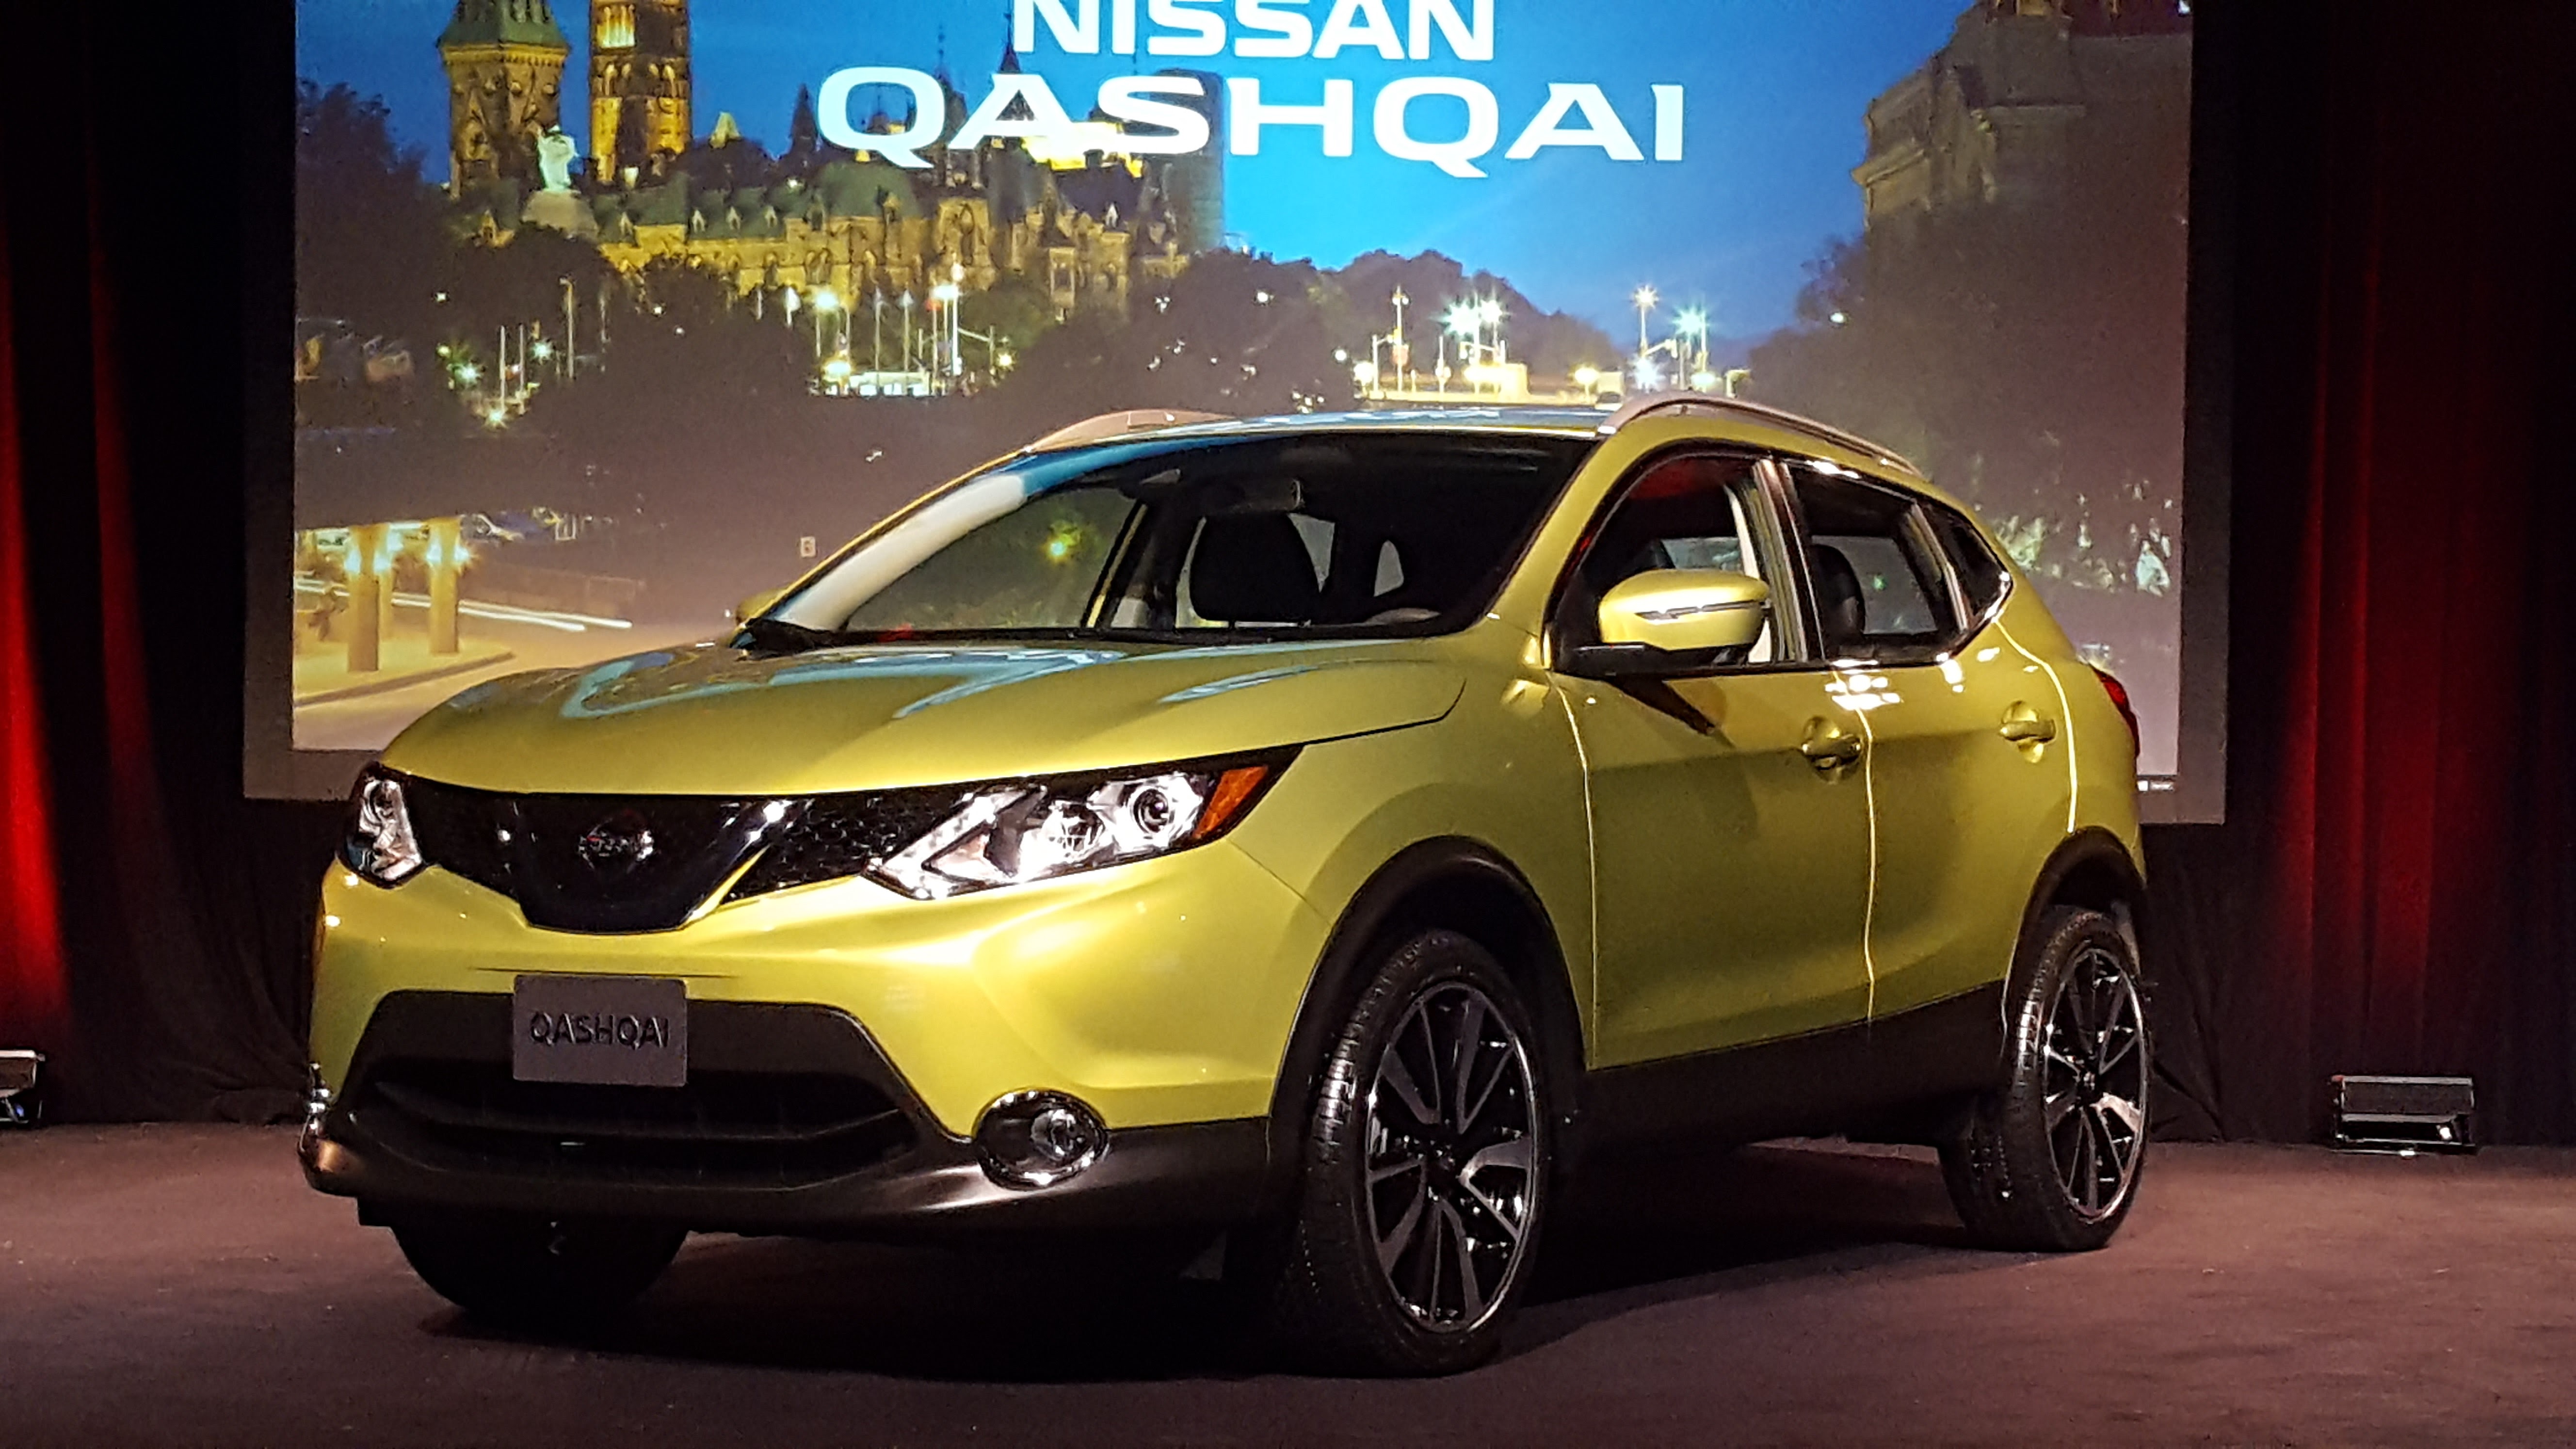 Nissan Qashqai accessories specifications